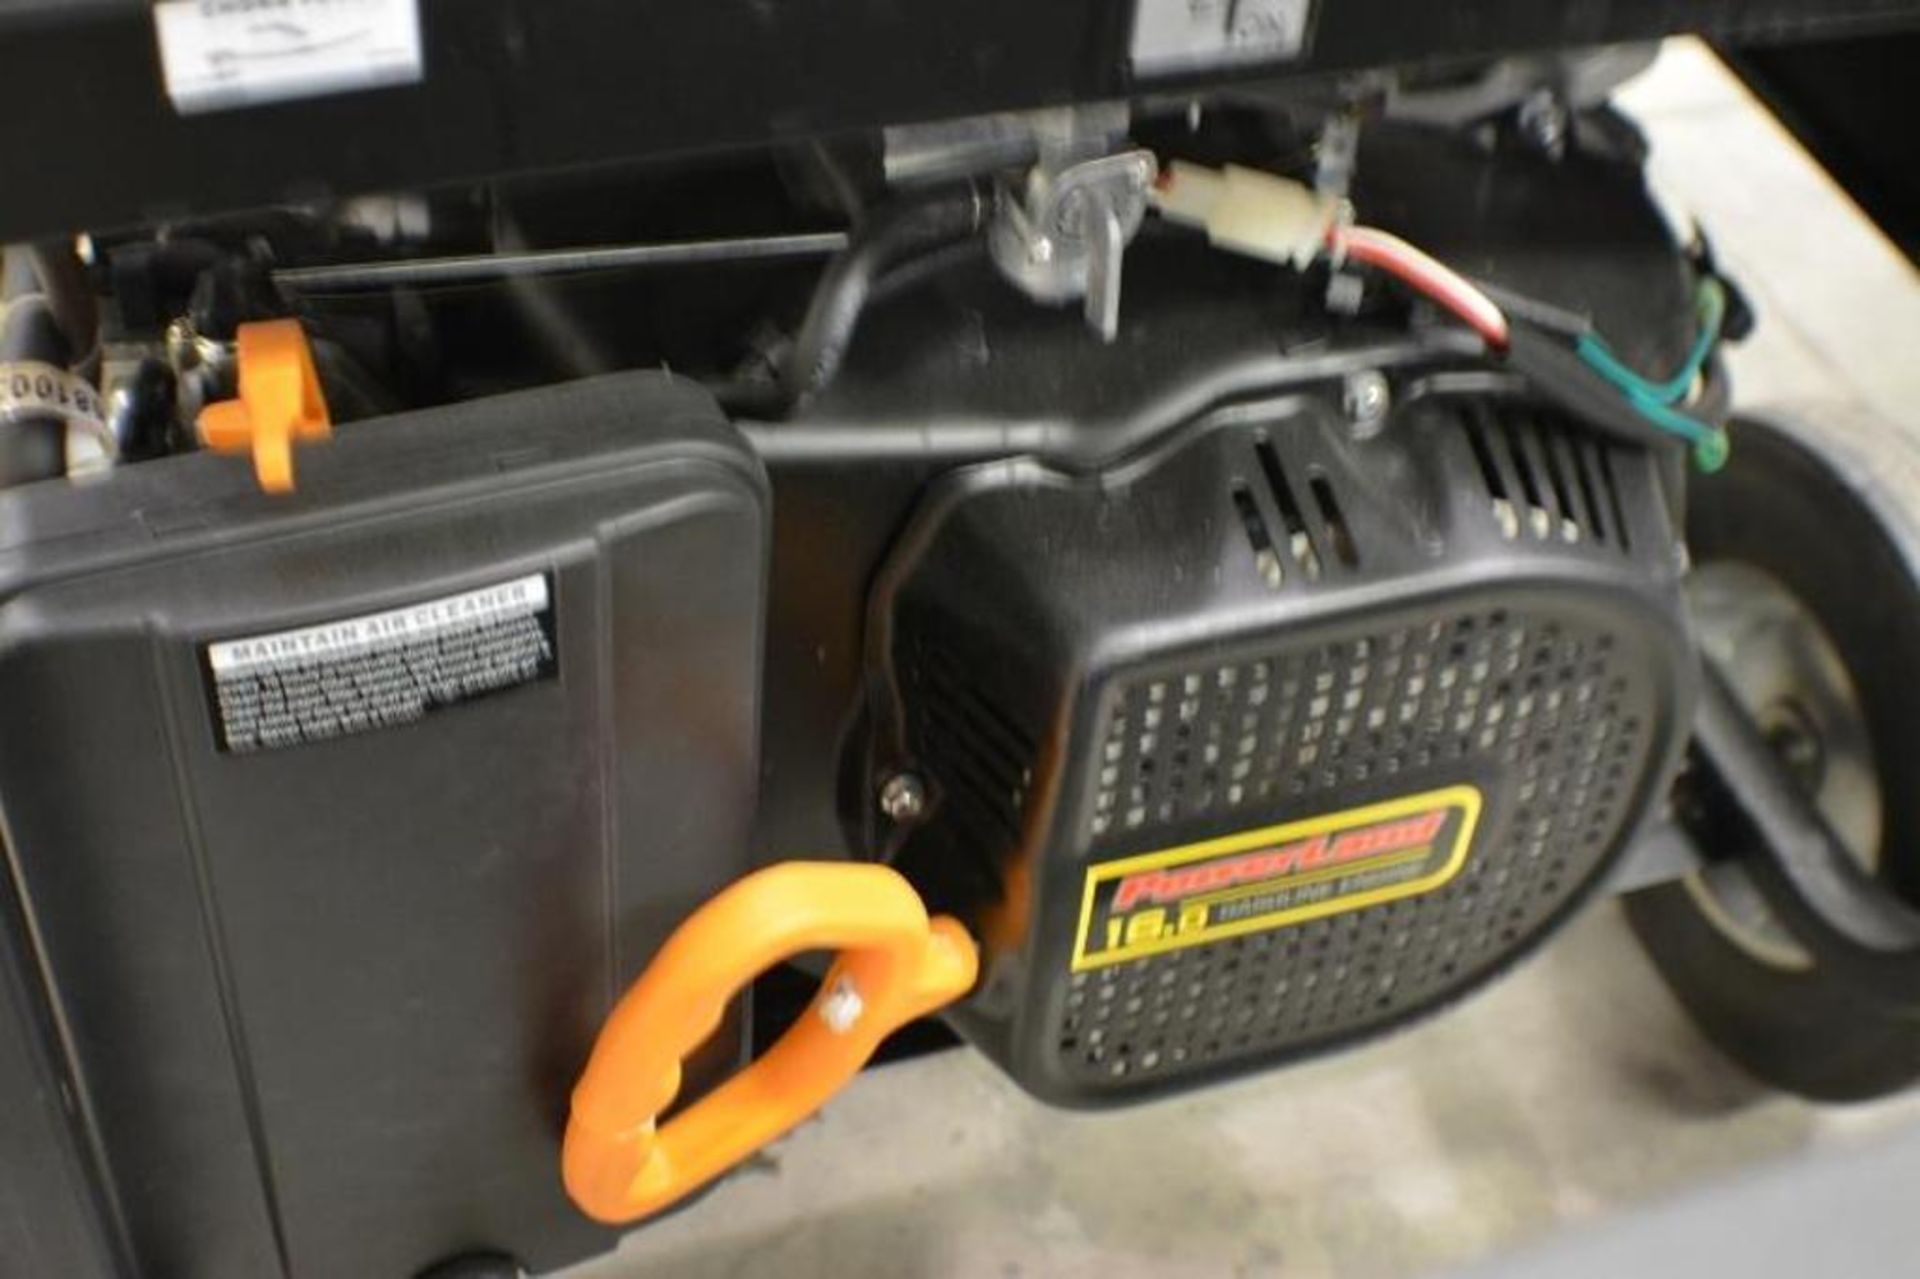 10000 Watts Gasoline Generator 16.0 HP with Electric Start Single Phase 120/240 Volts by Powerland - Image 7 of 7